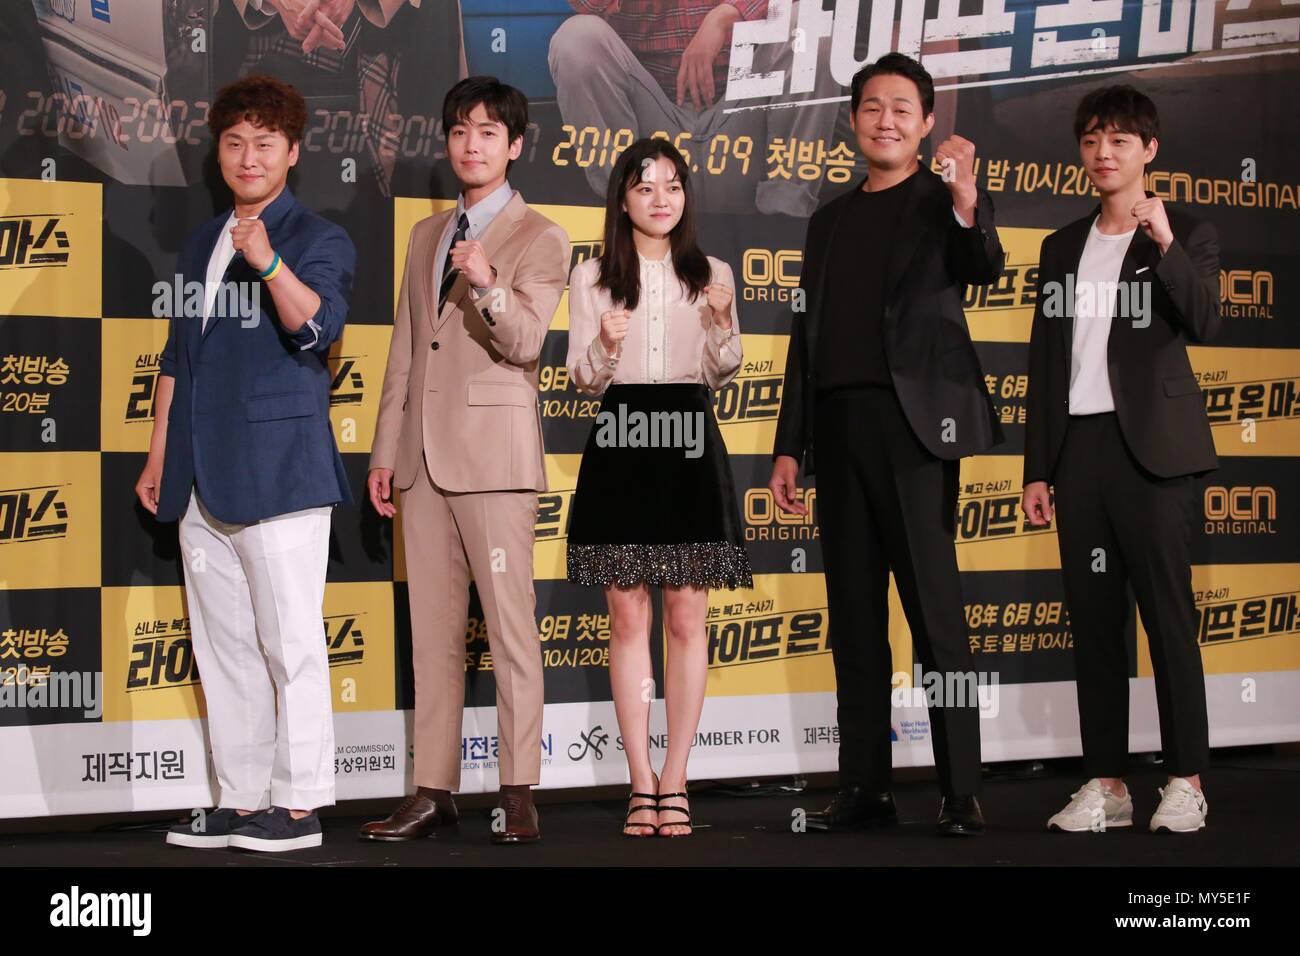 Seoul, Korea. 05th June, 2018. Jung Kyung Ho, Park Sung-woong, Ko A Sung, Dae-hwan Oh, Bryan Lu etc. attended the production conference of TV series 'Life on Mars' in Seoul, Korea on 05th June, 2018.(China and Korea Rights Out) Credit: TopPhoto/Alamy Live News Stock Photo